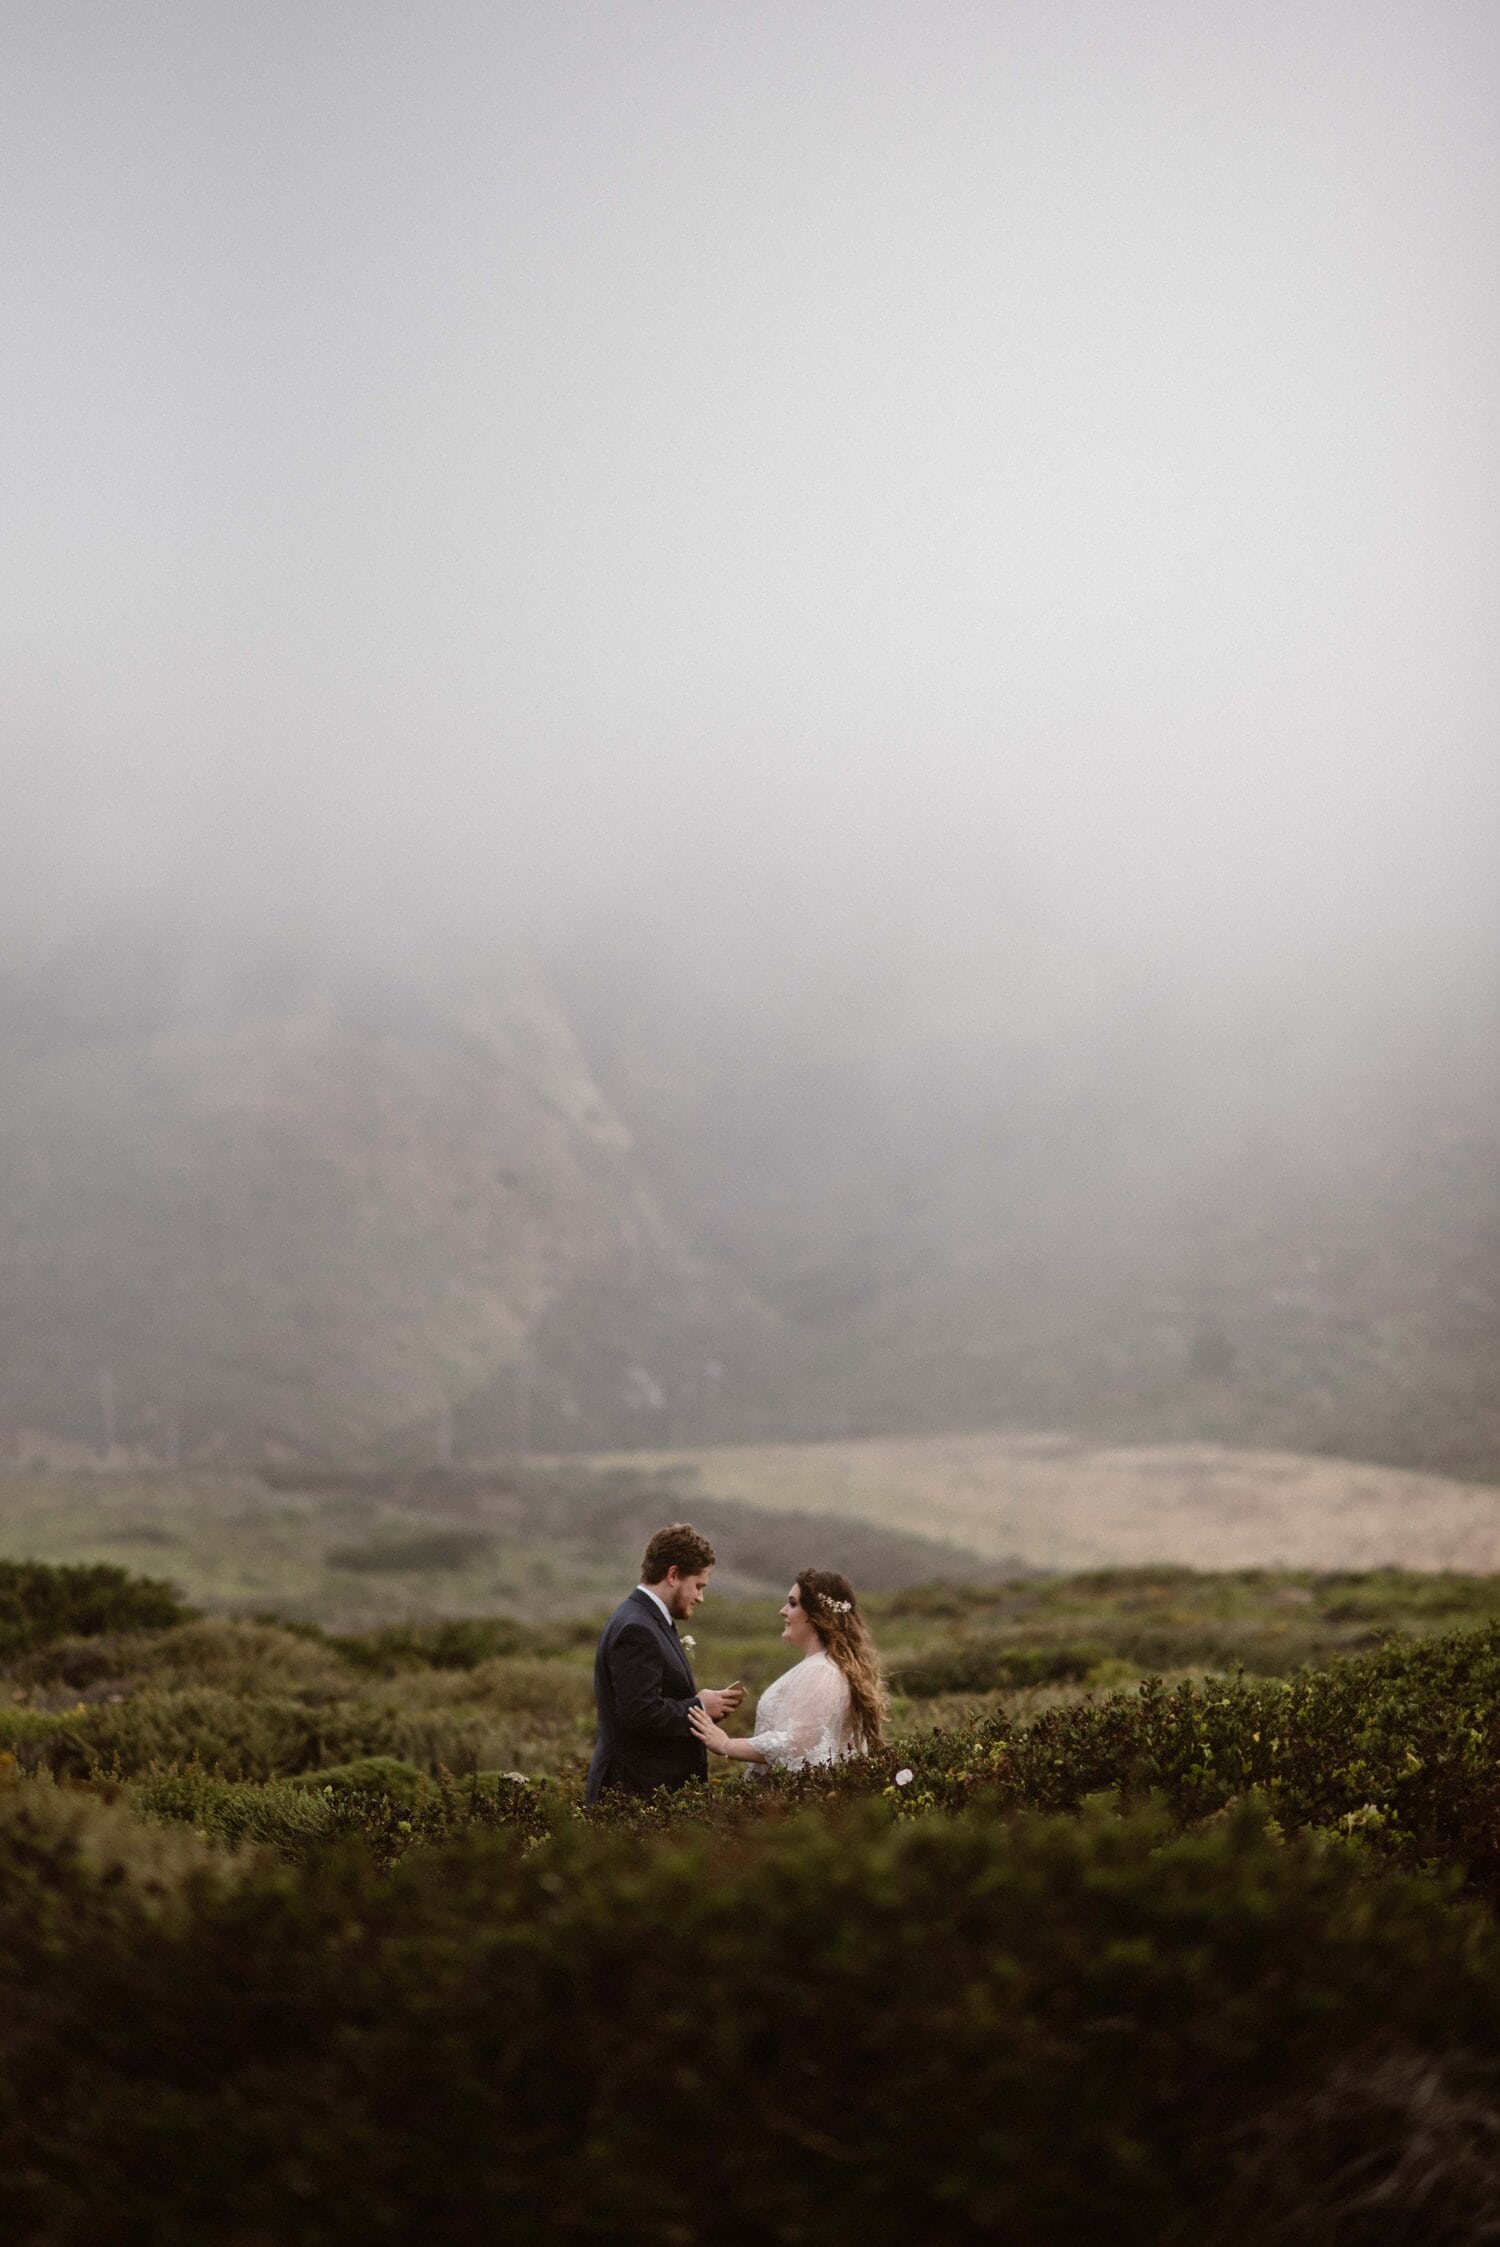 Groom reads his vows to bride and they are surrounded by waist-high  greenery in Big Sur, California.